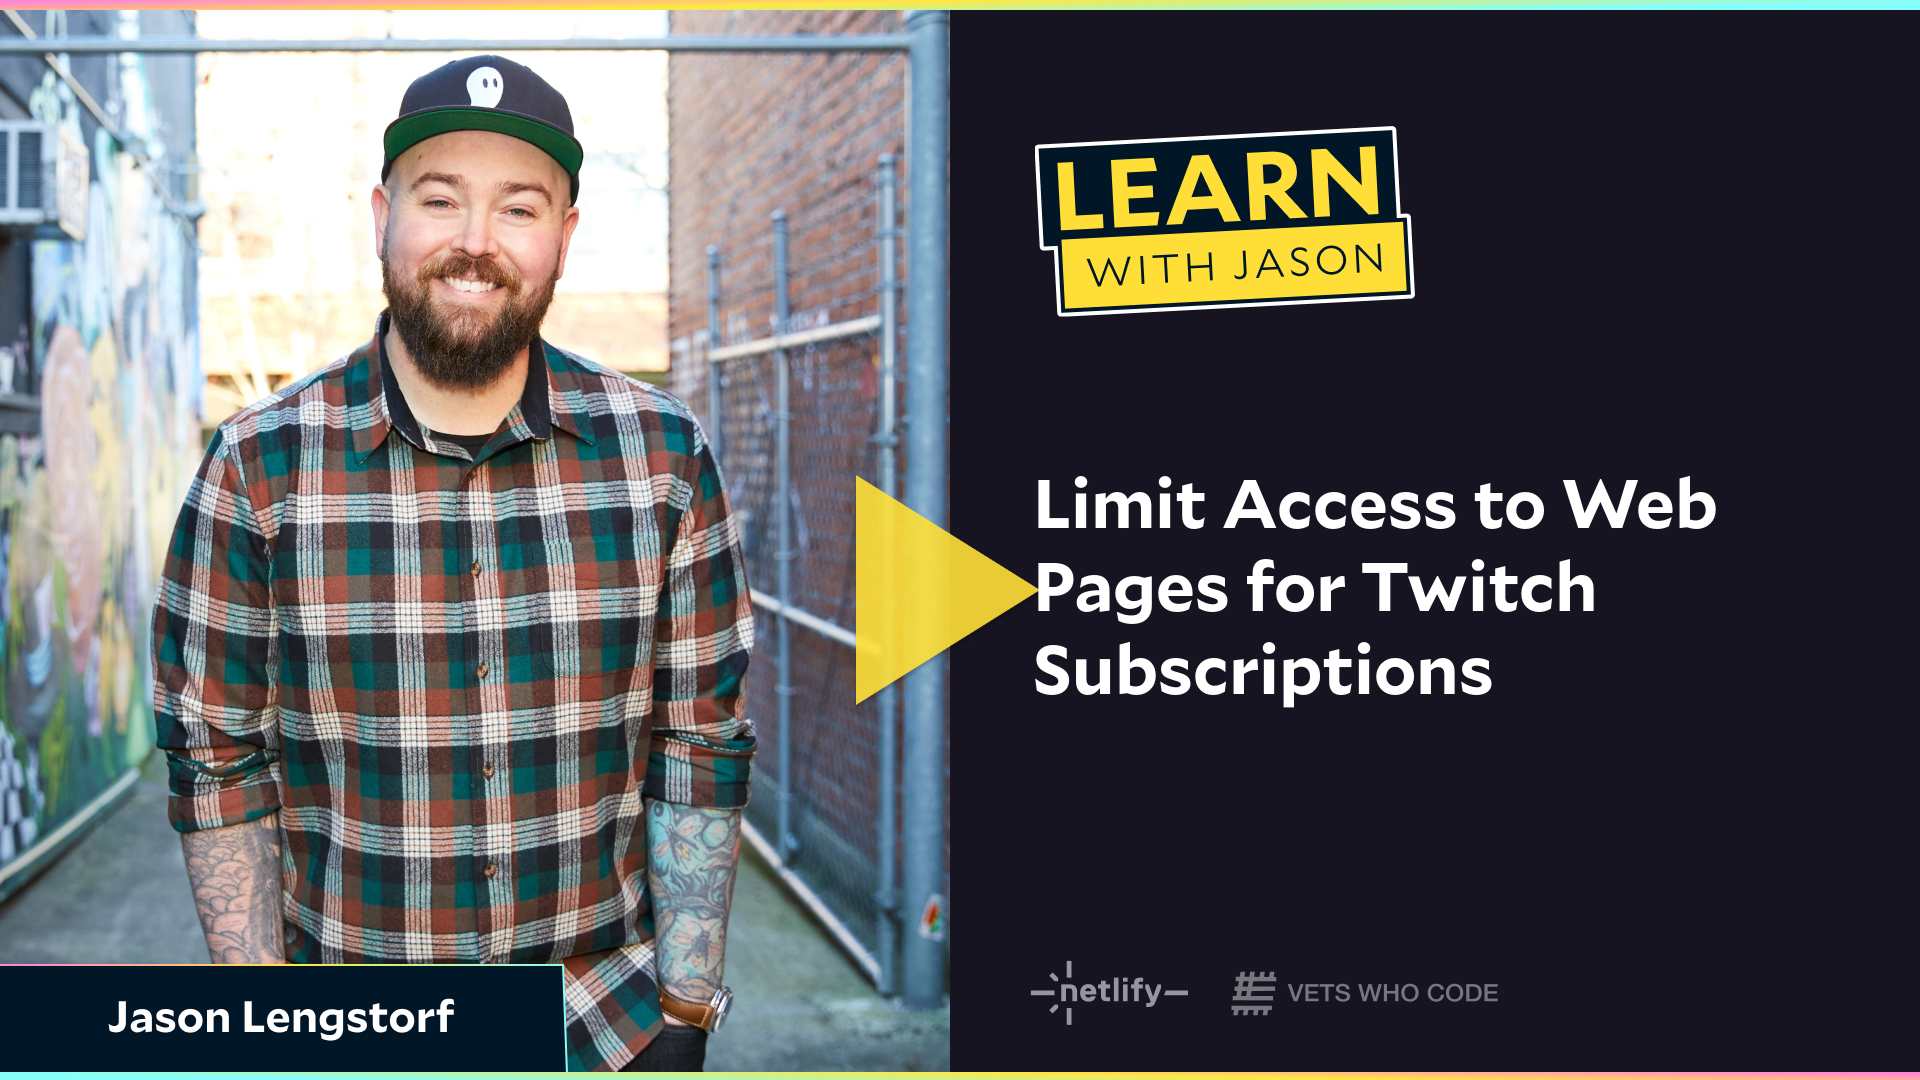 Limit Access to Web Pages for Twitch Subscriptions (with Jason Lengstorf)